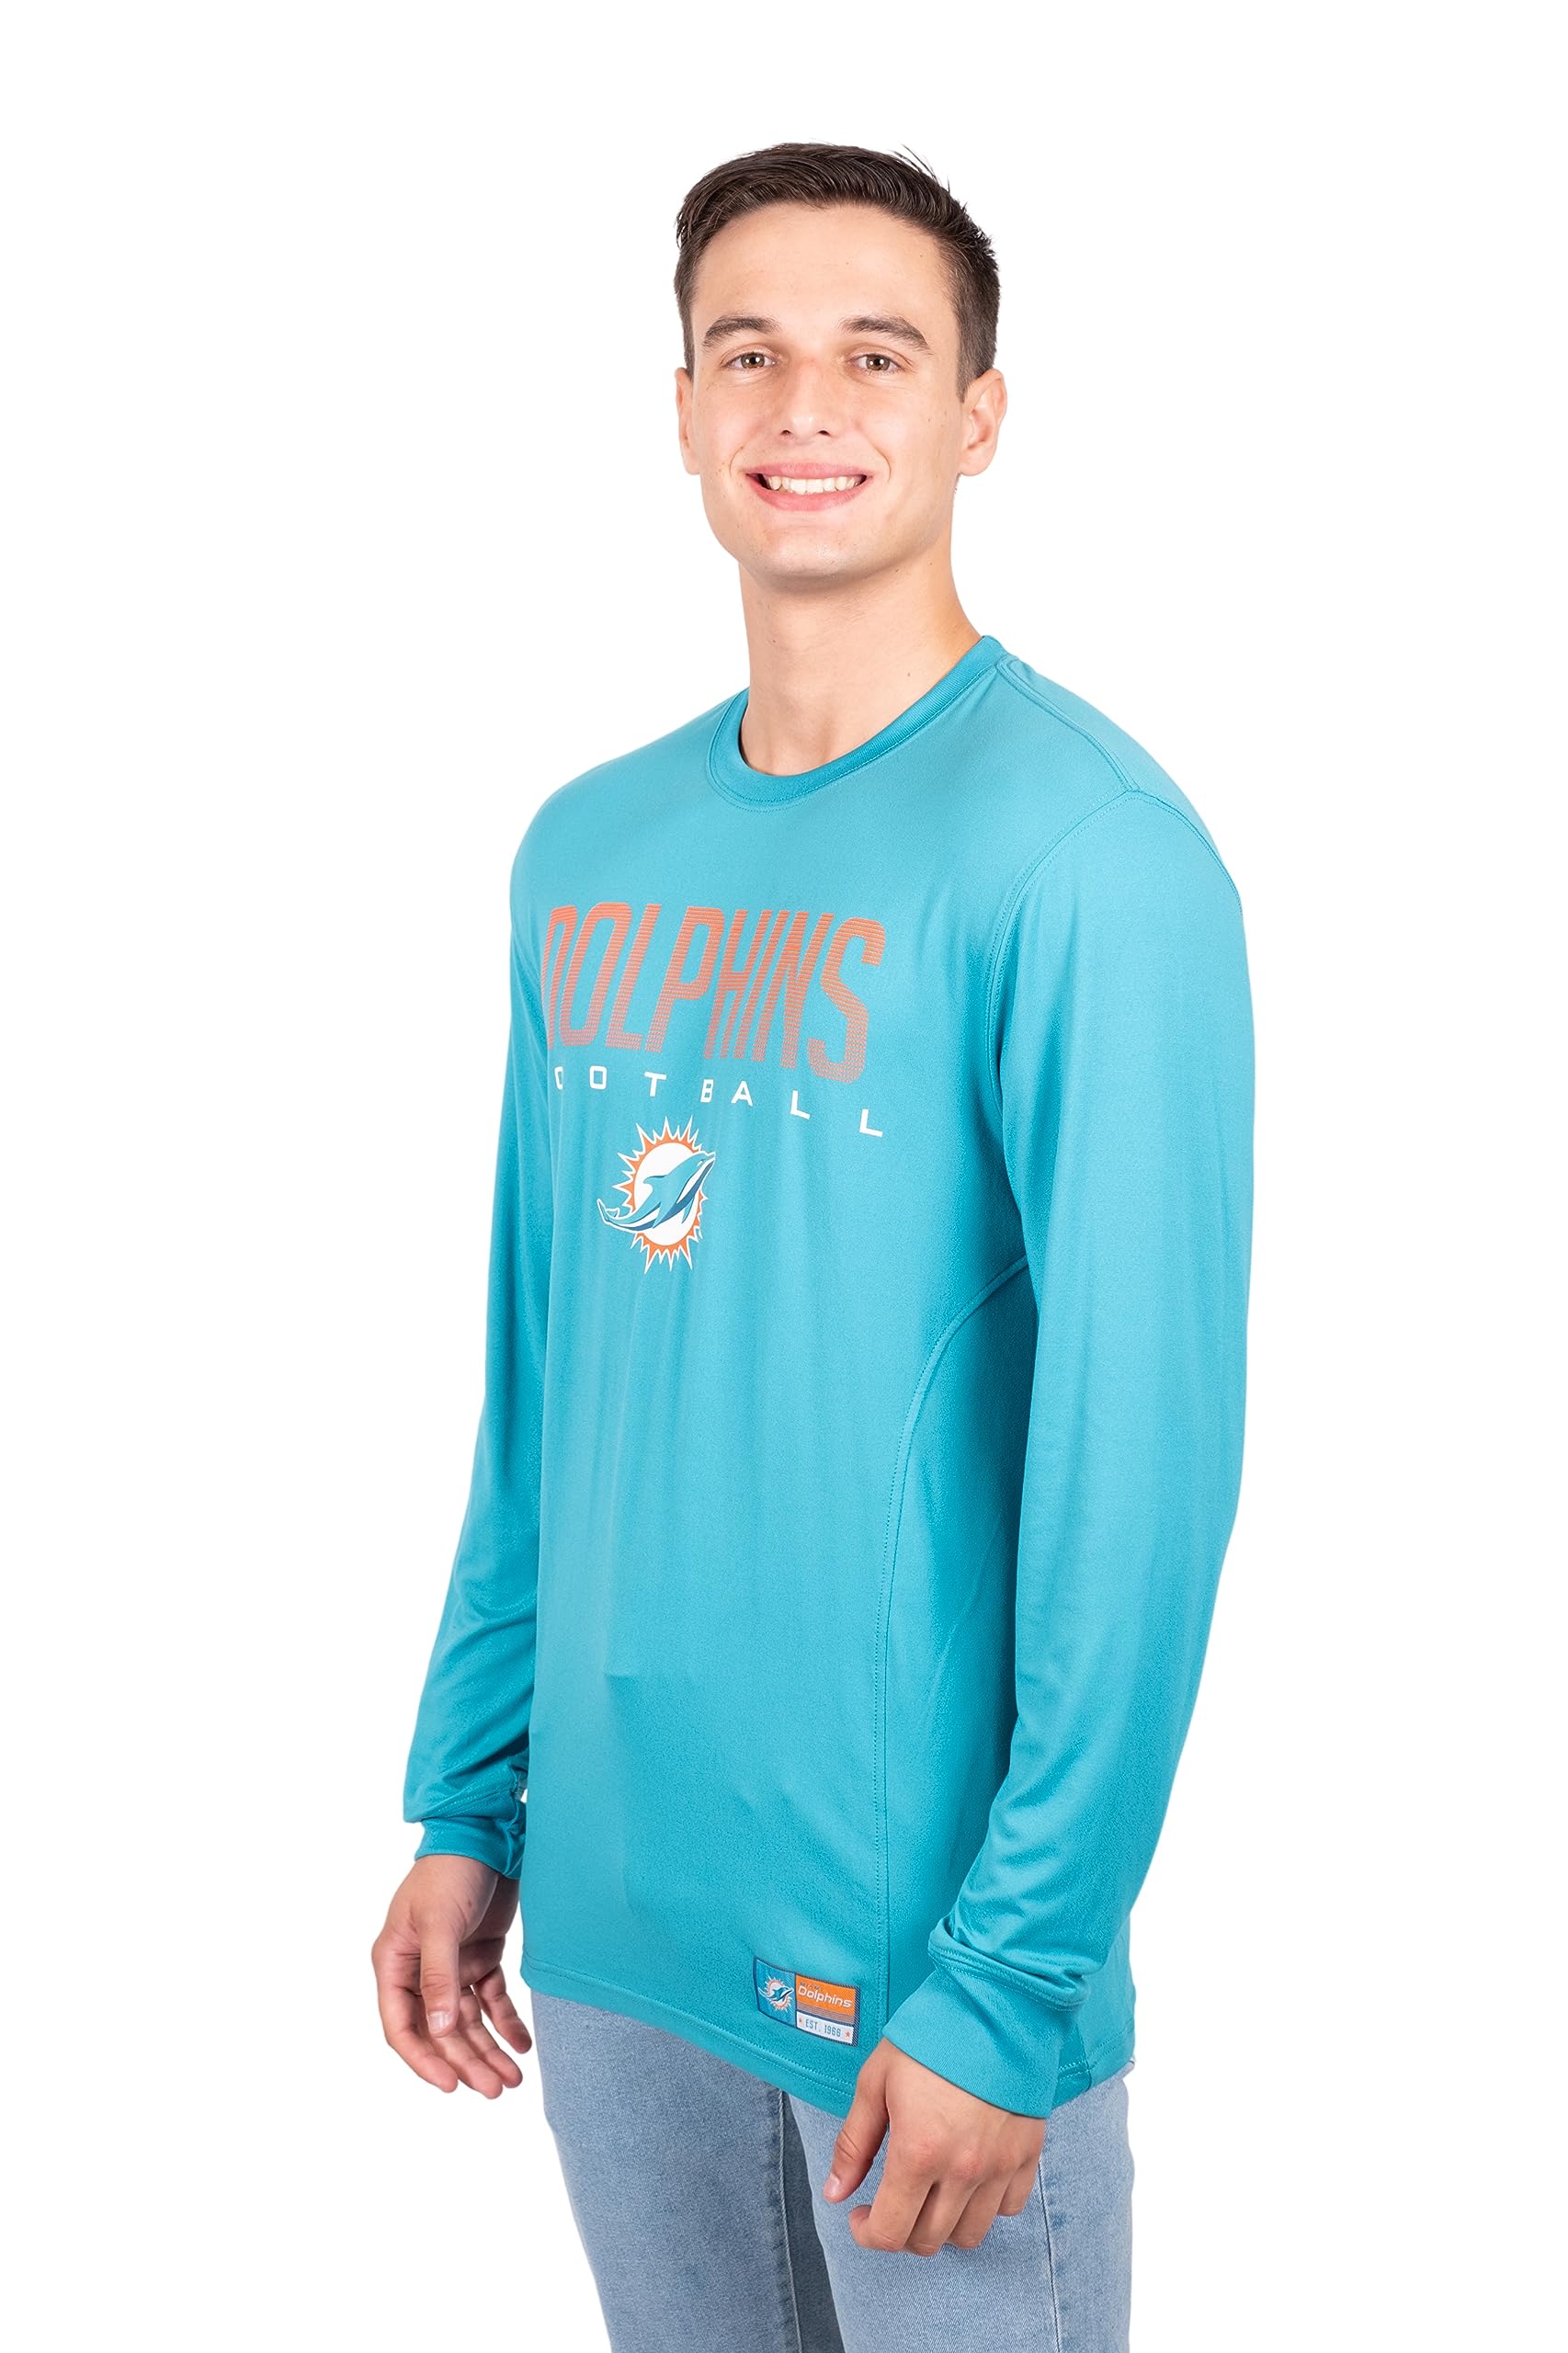 Ultra Game NFL Miami Dolphins Mens Active Lightweight Quick Dry Long Sleeve T-Shirt|Miami Dolphins